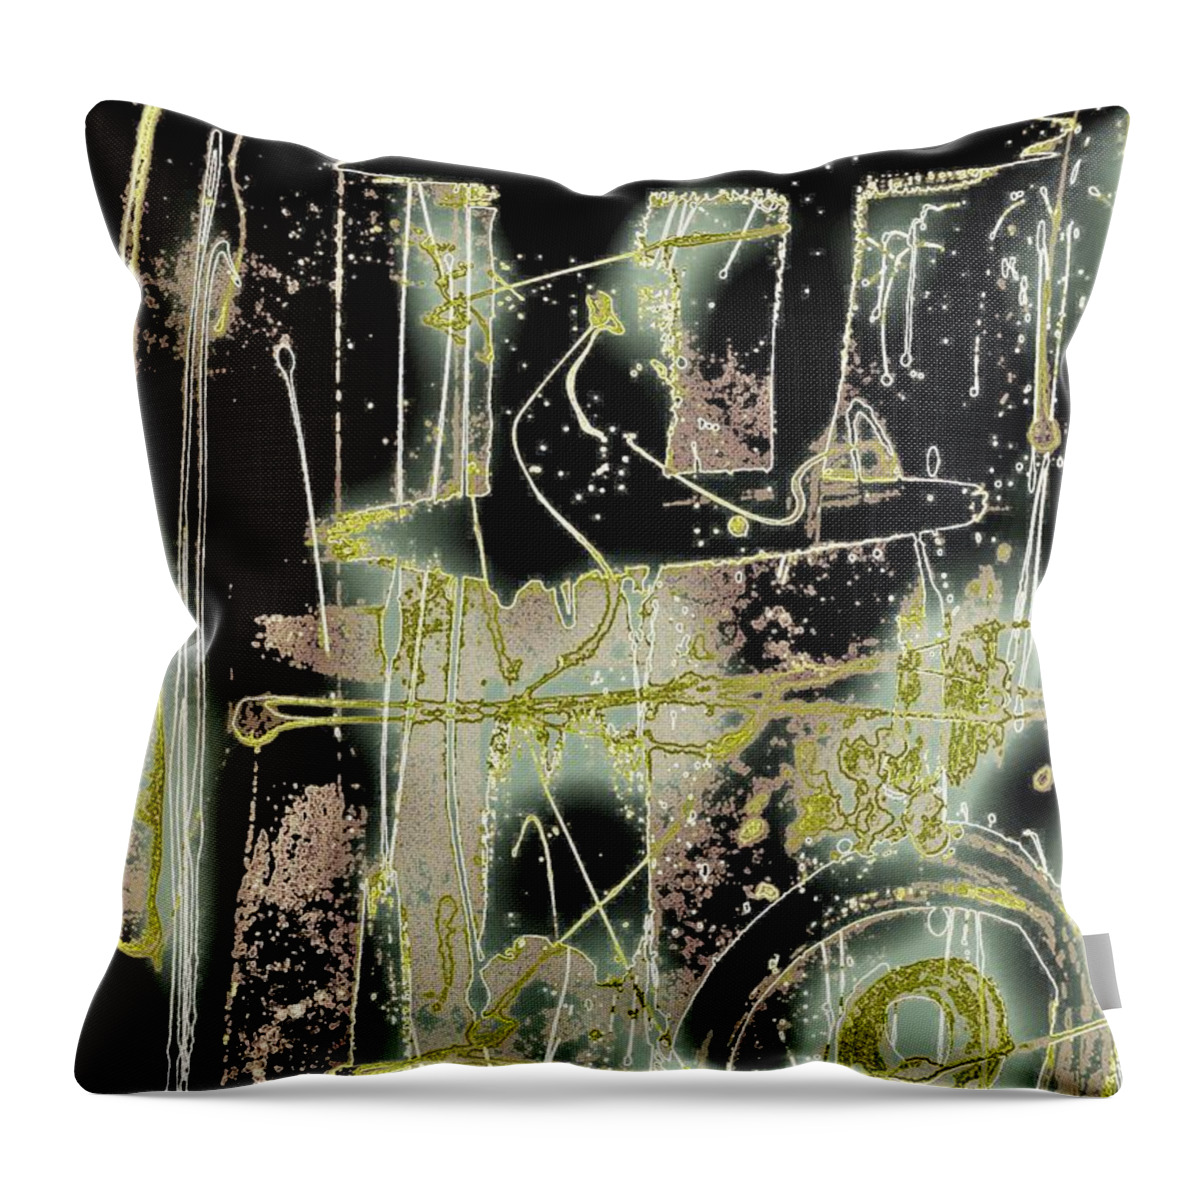 Signs And Symbols Throw Pillow featuring the painting Sea Sage by Cleaster Cotton